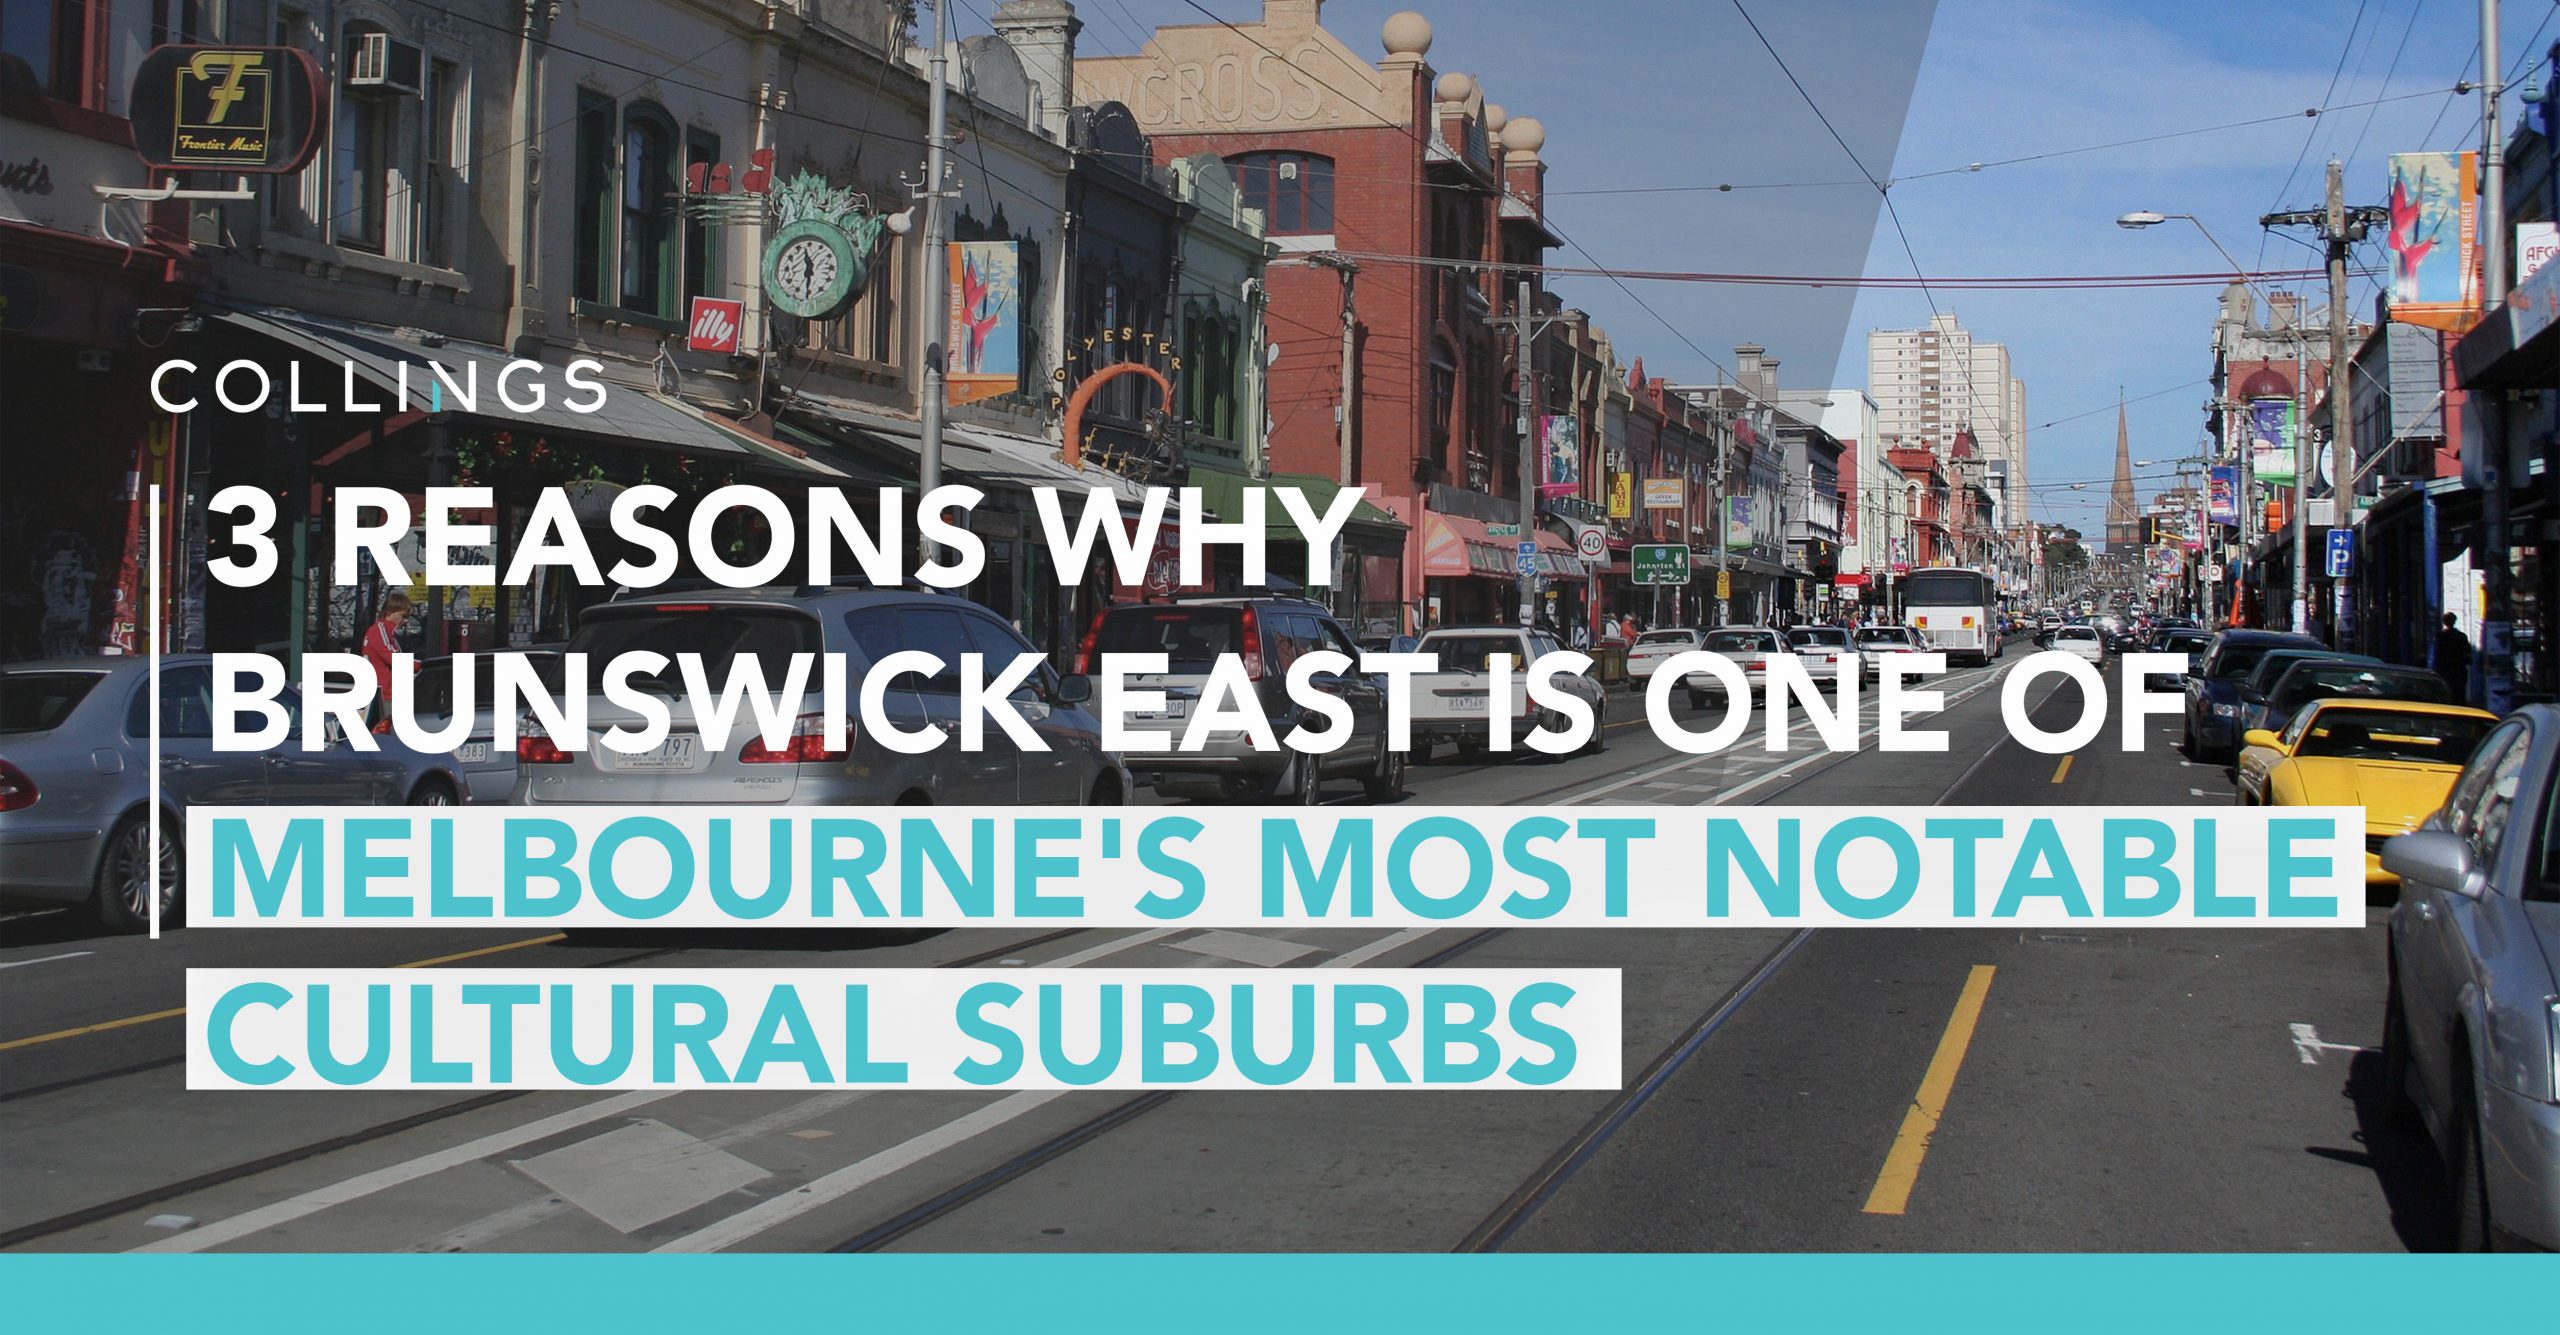 3 Reasons Why Brunswick East is one of Melbourne's Cultural Suburbs